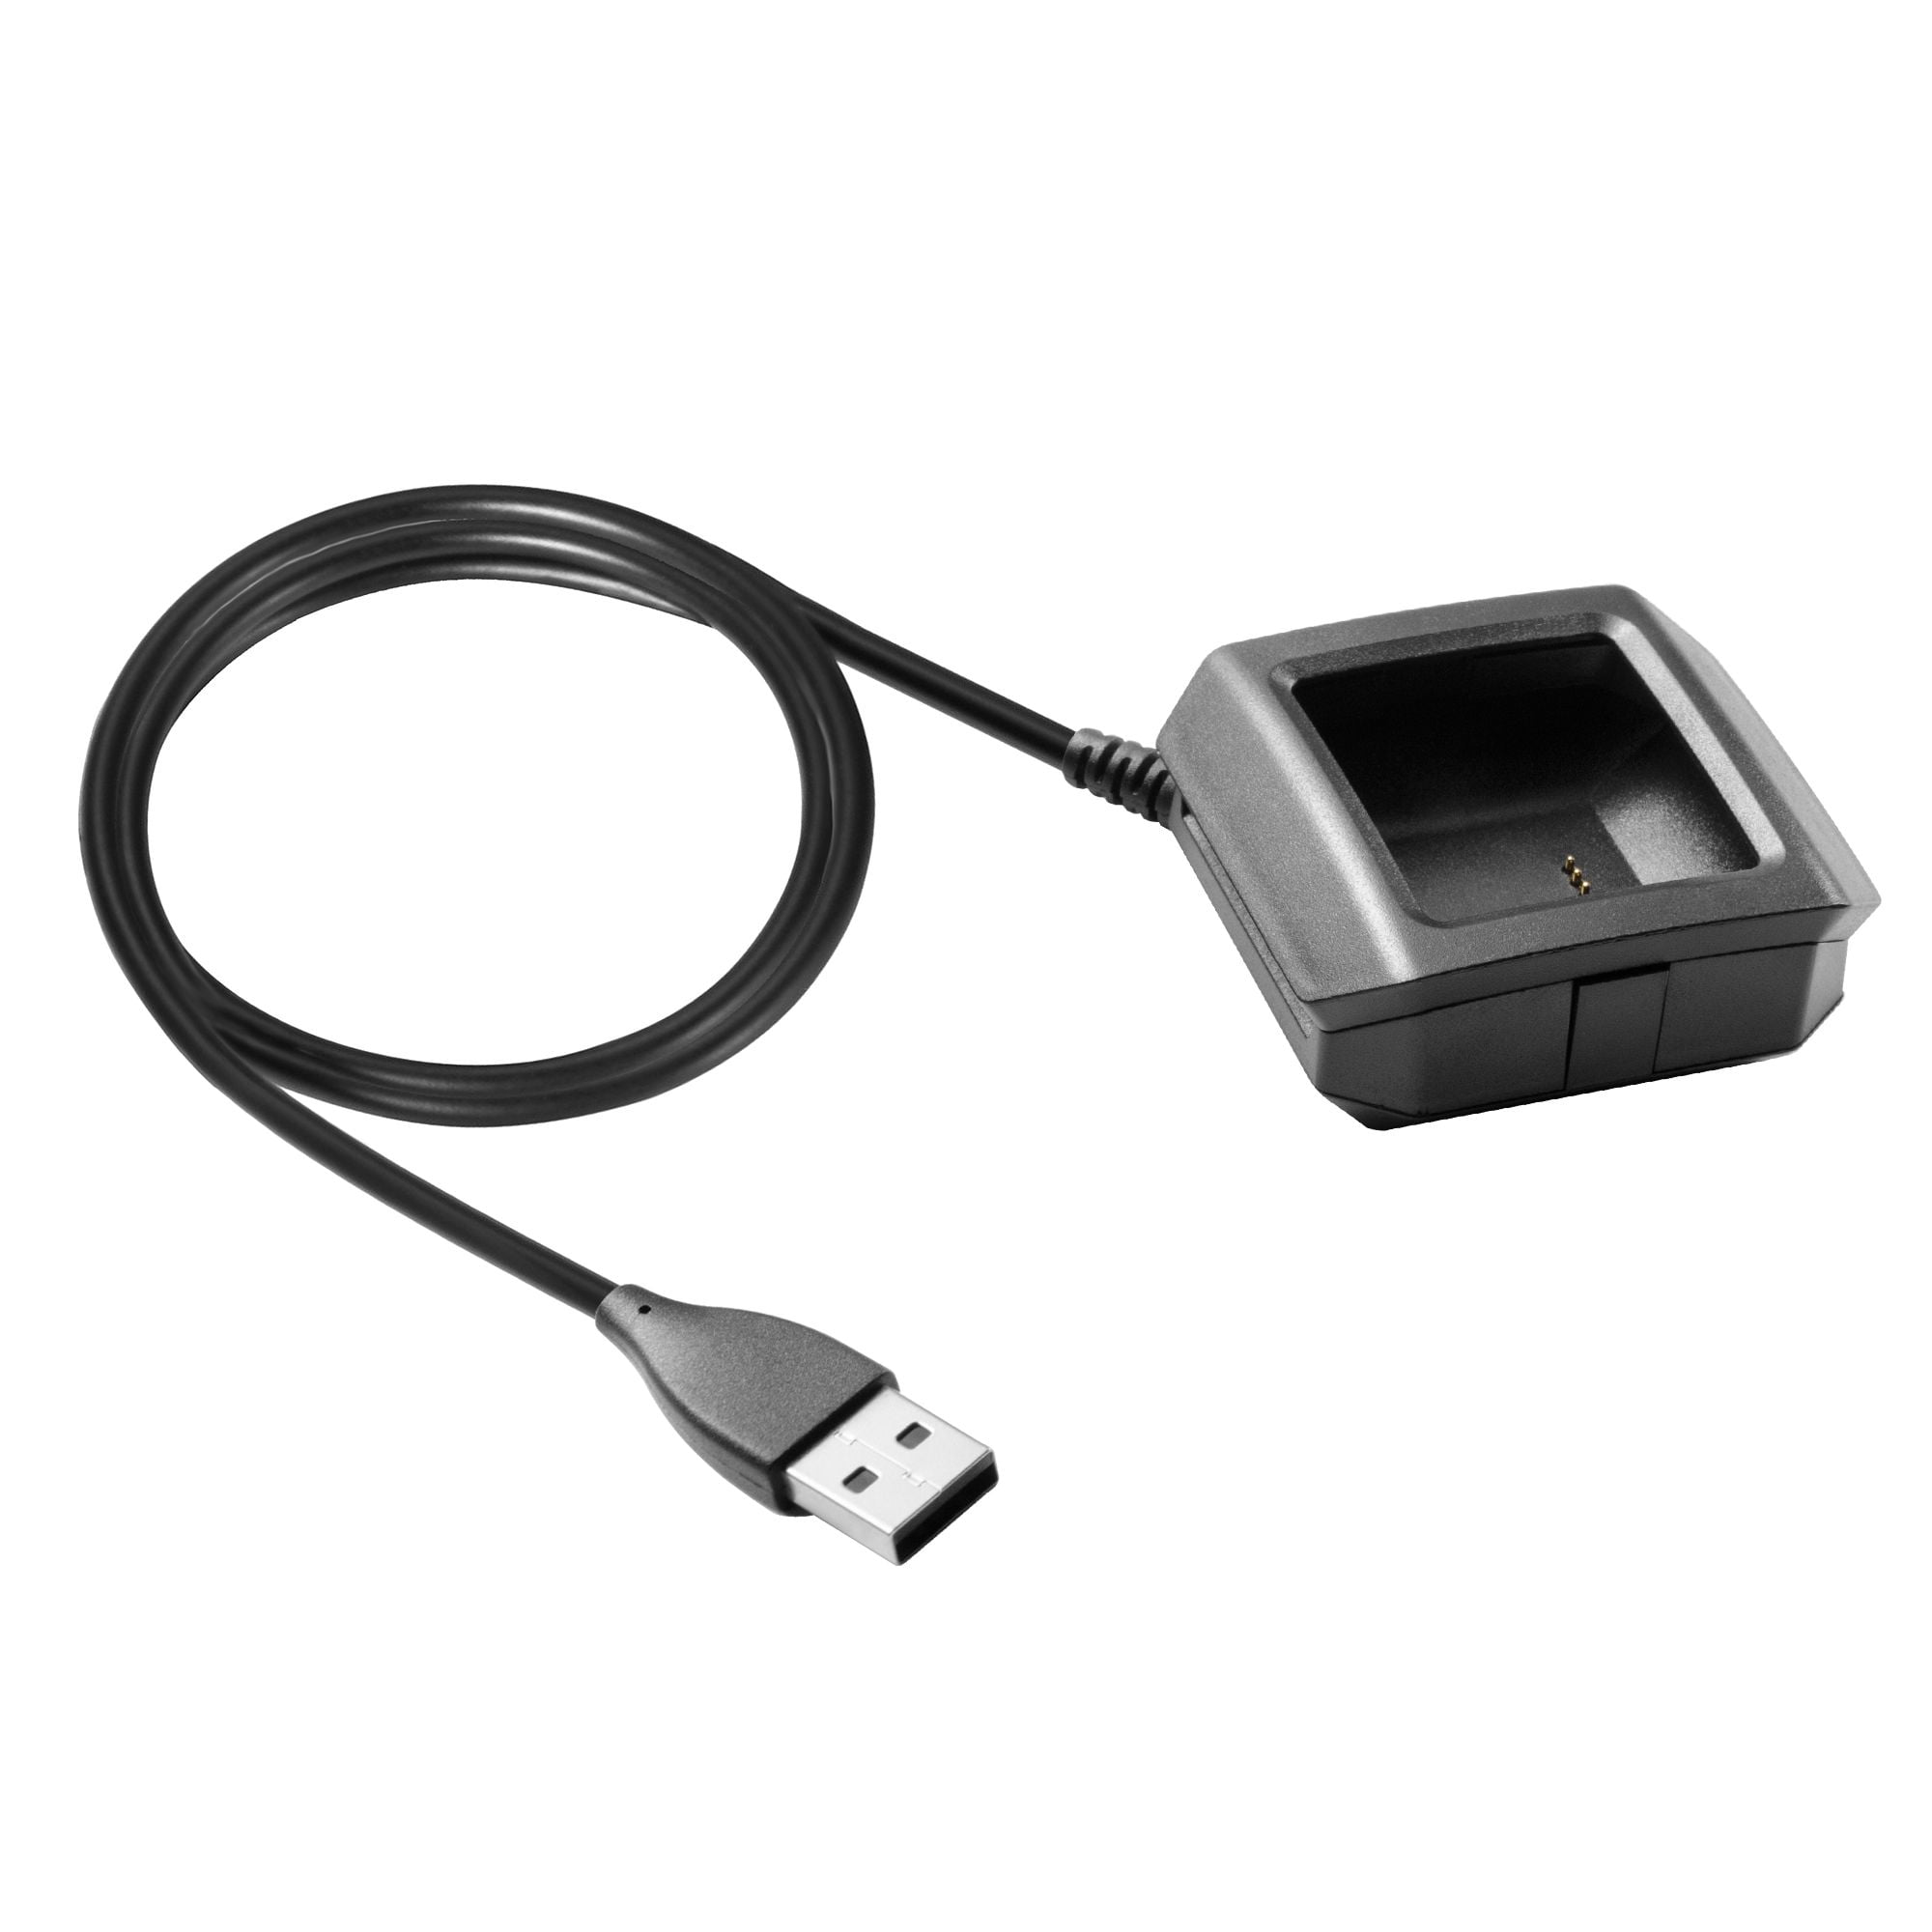 charger for a fitbit watch